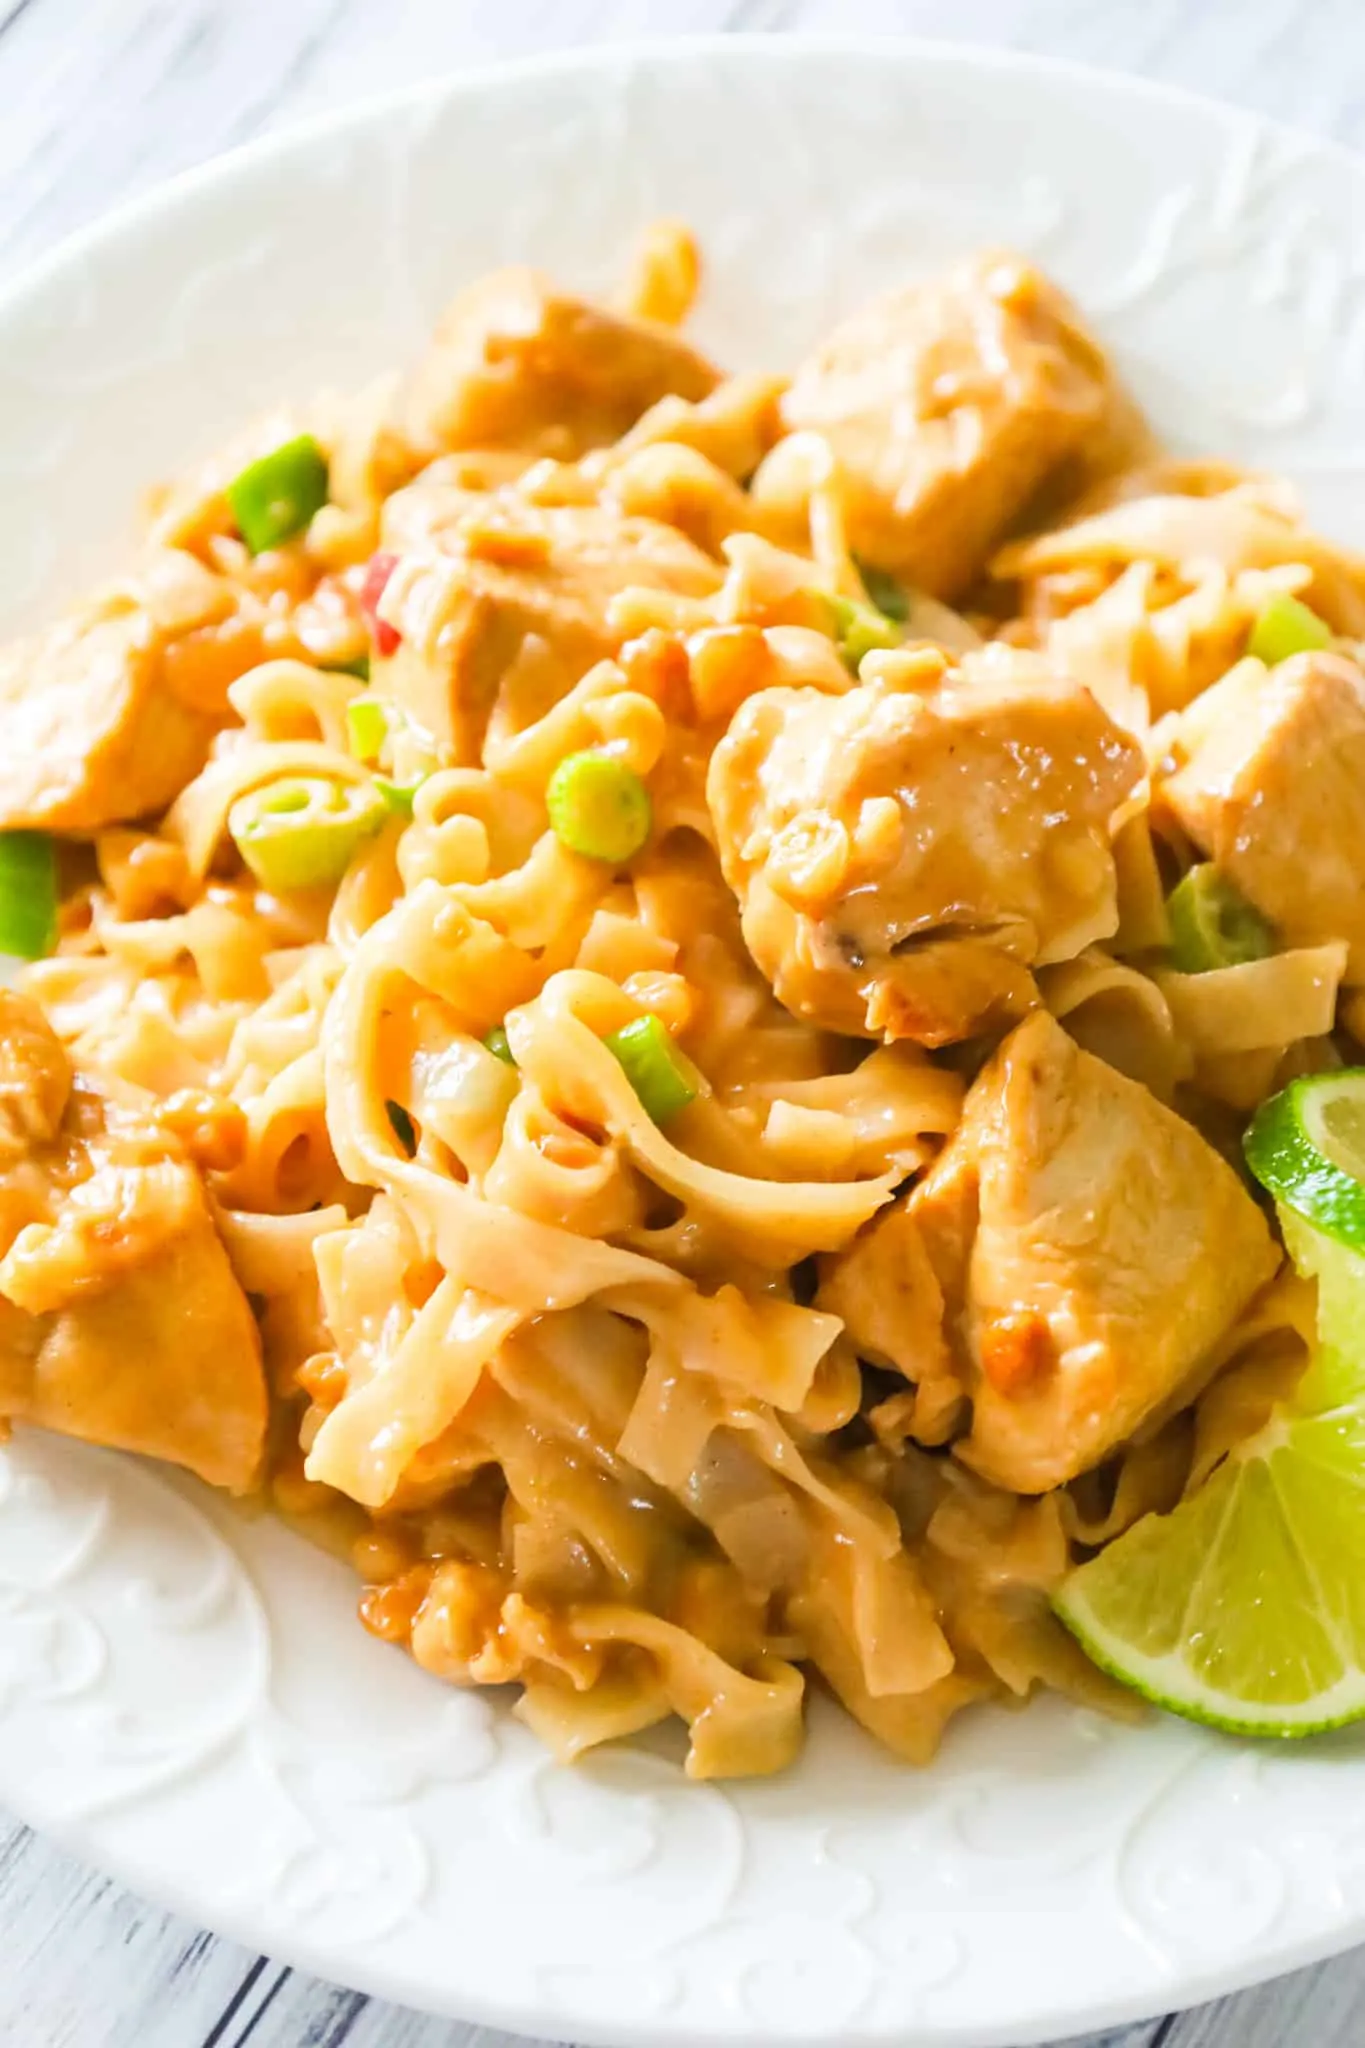 Peanut Butter Chicken is an easy dinner recipe made with boneless, skinless chicken breast chunks and rice stick noodles all tossed in sauce made from coconut milk, soy sauce, lime juice, Thai chili sauce and peanut butter.